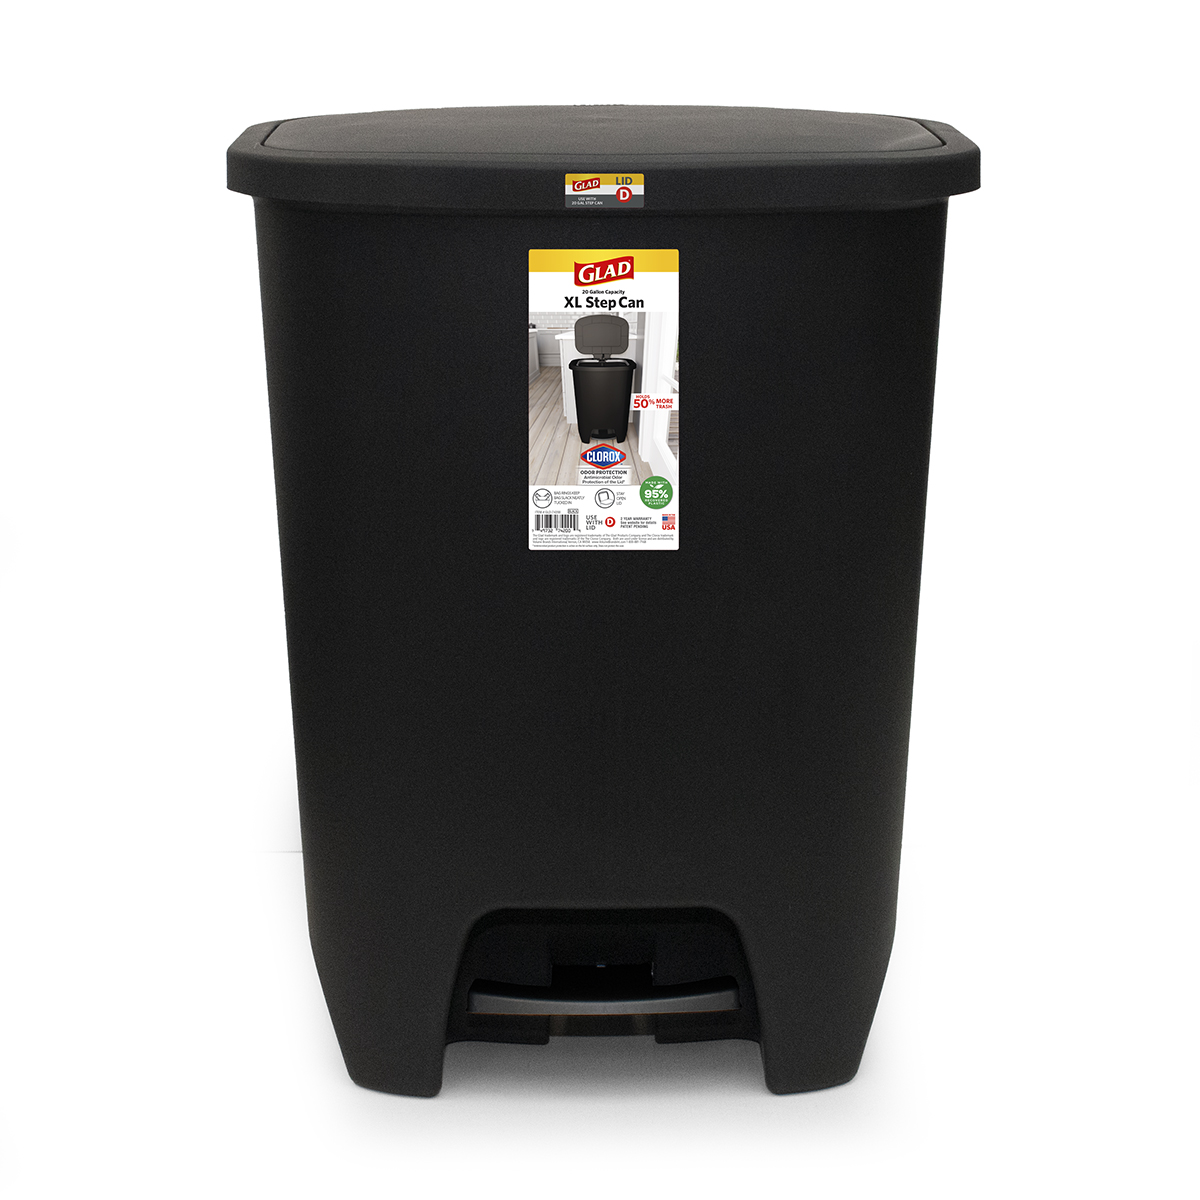 Glad XL Trash Can, Plastic Step-on Kitchen Trash Can, with Clorox Odor Defense, Black - image 1 of 4